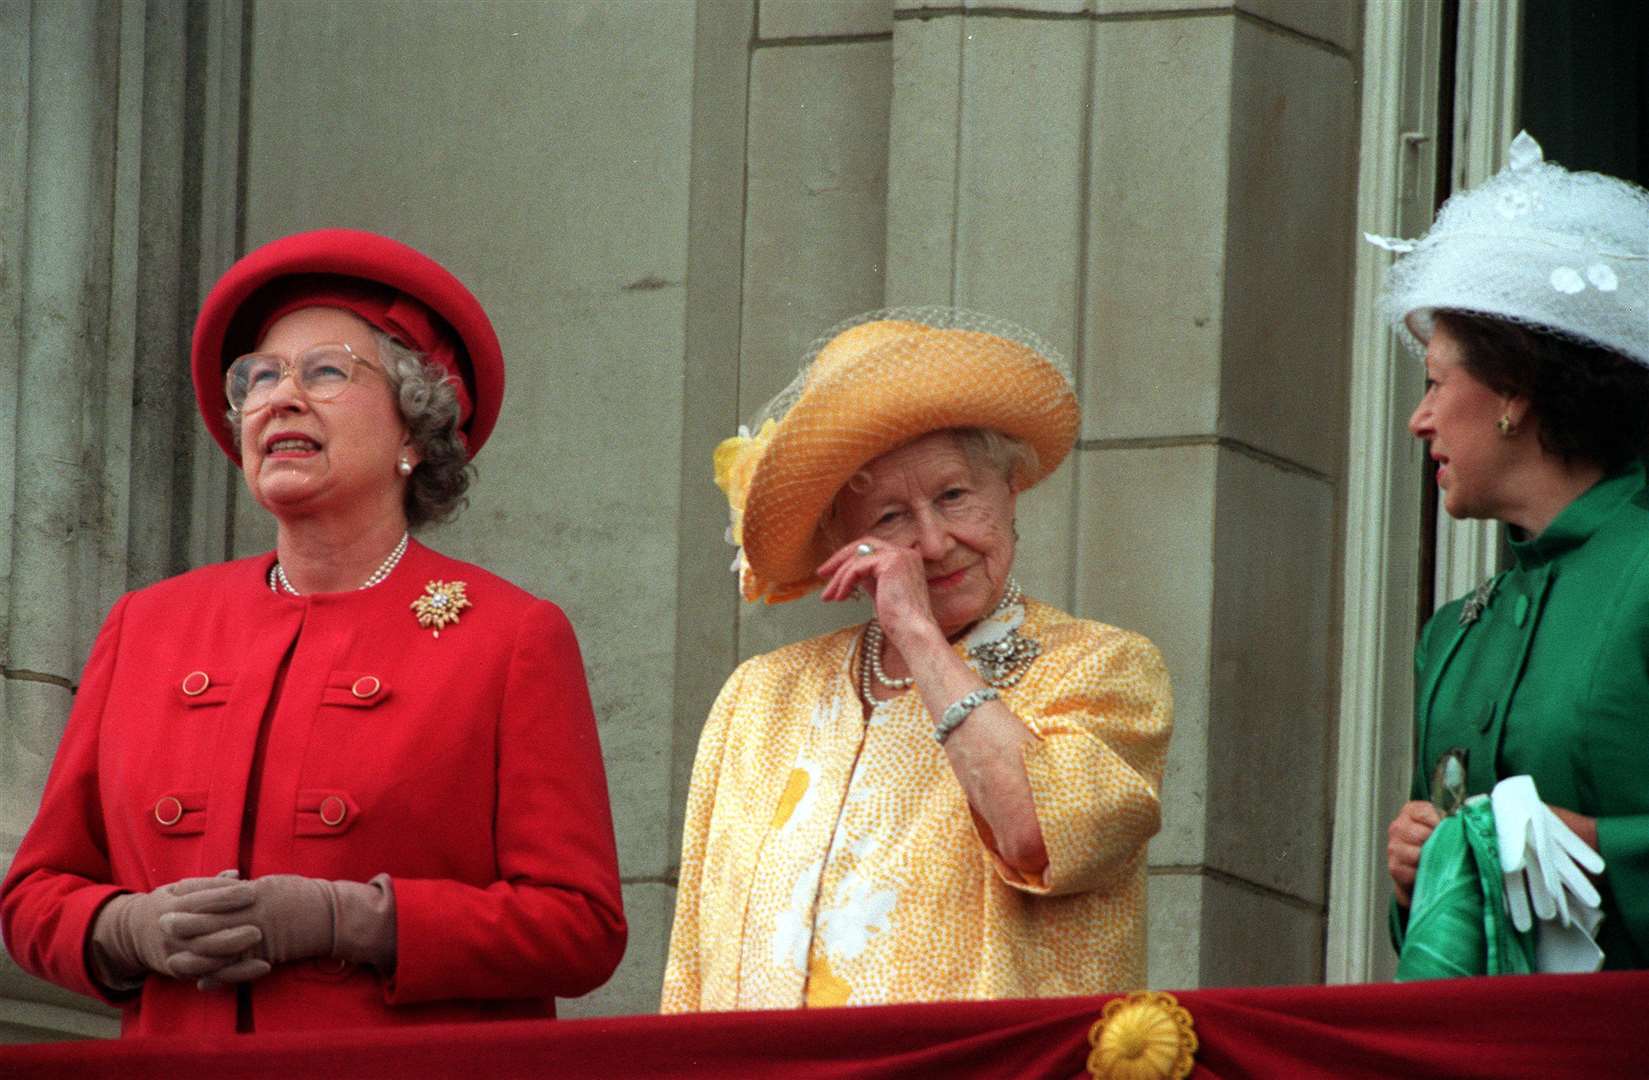 The Queen Mother, alongside the Queen and Princess Margaret, wipes her eye as she stands on the balcony of Buckingham Palace on the 50th anniversary of VE Day in 1995 (PA)